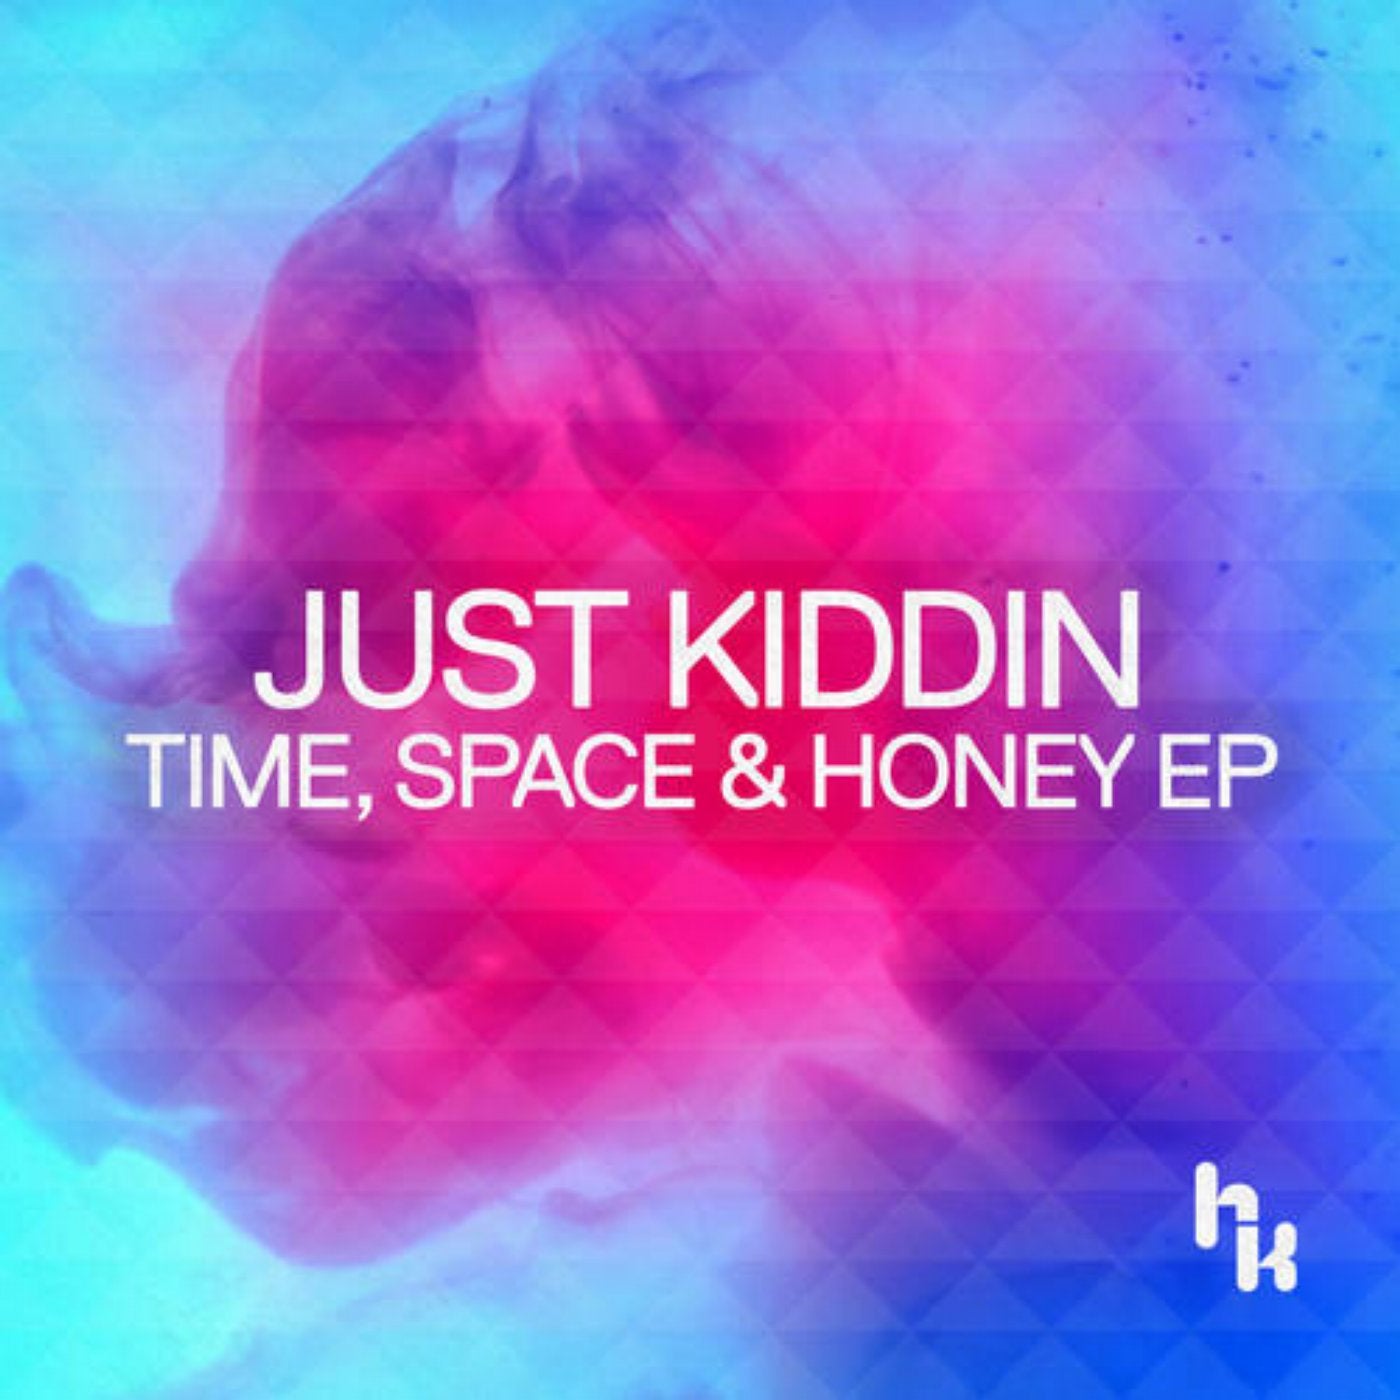 Time, Space & Honey EP